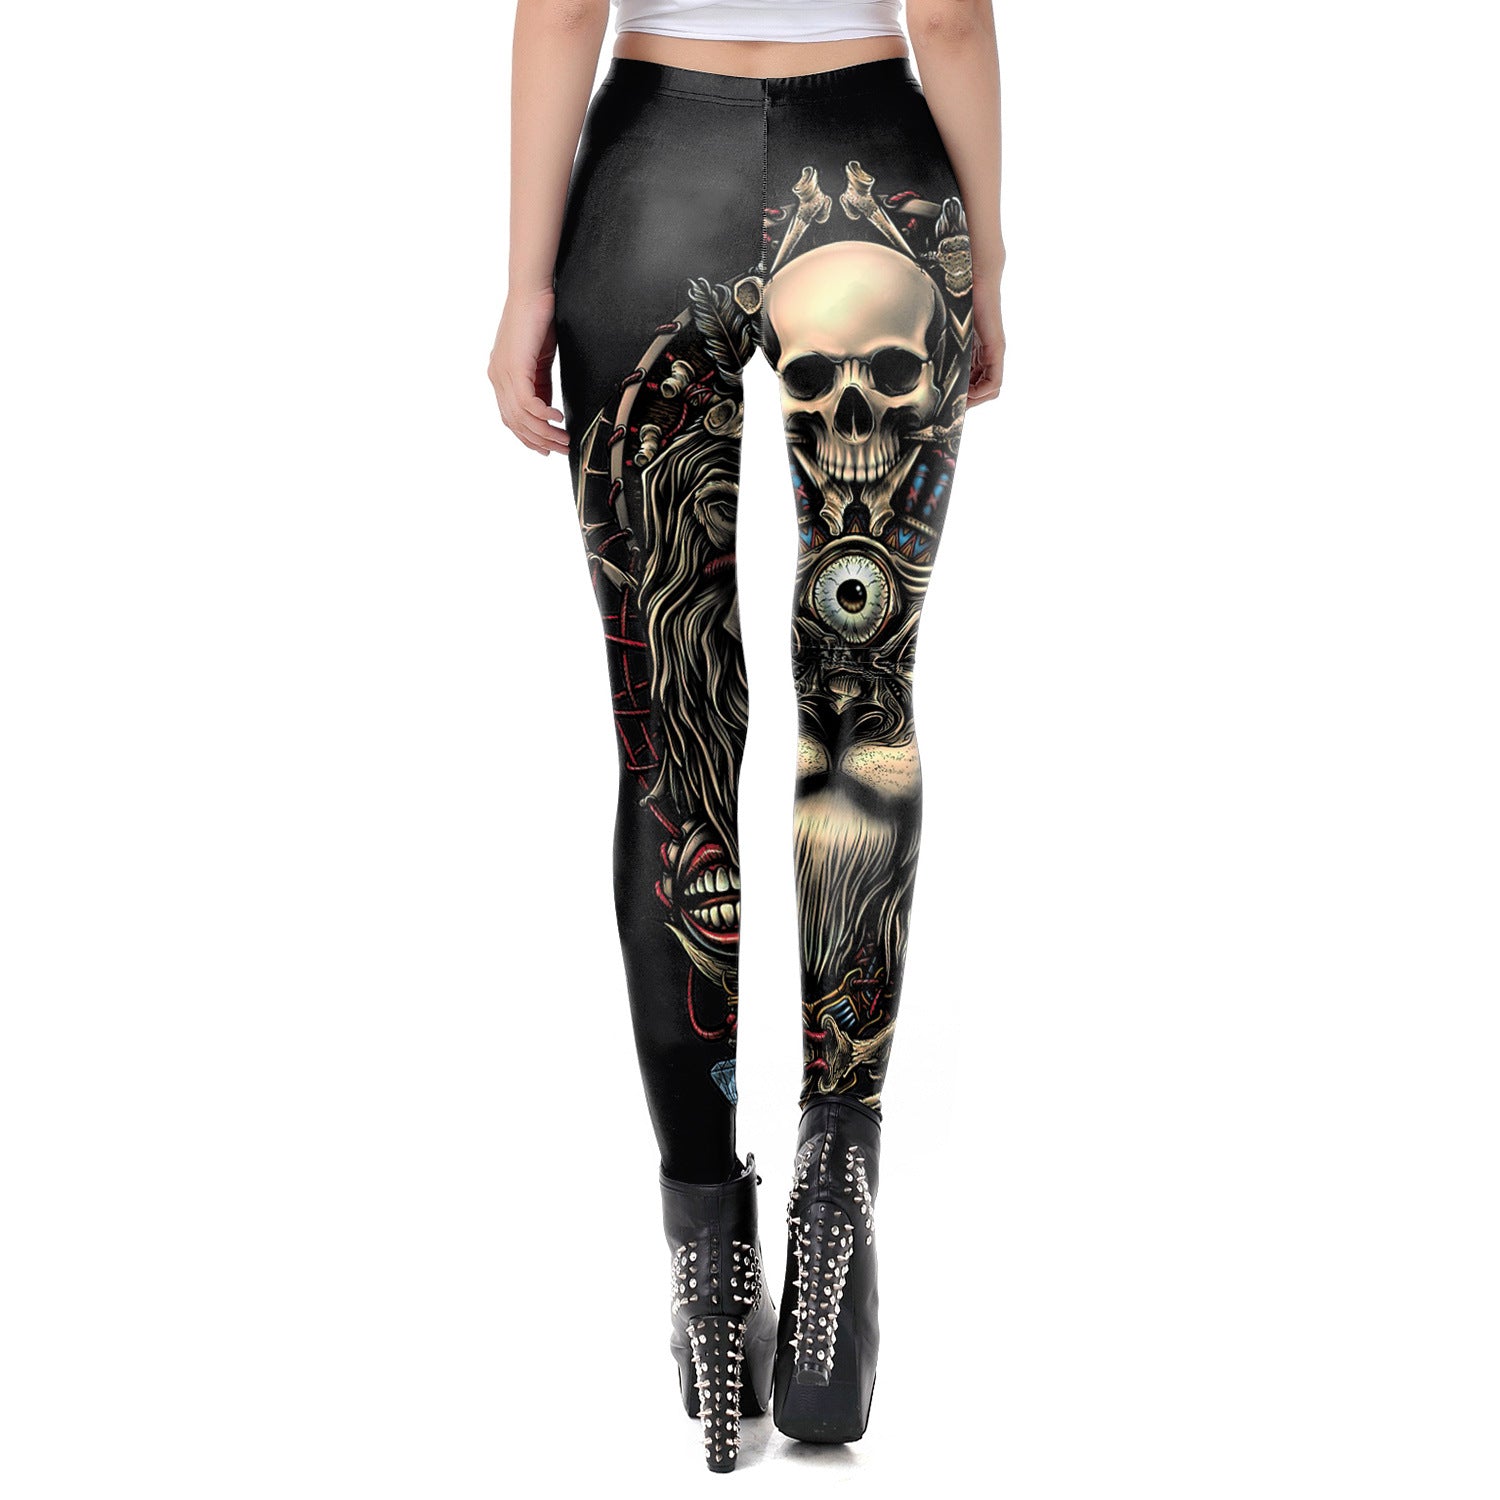 A woman adding a Gothic flair to her outfit with a pair of Maramalive™ Gothic Women's Leggings - Dark Mystic tight pants featuring a skull design.